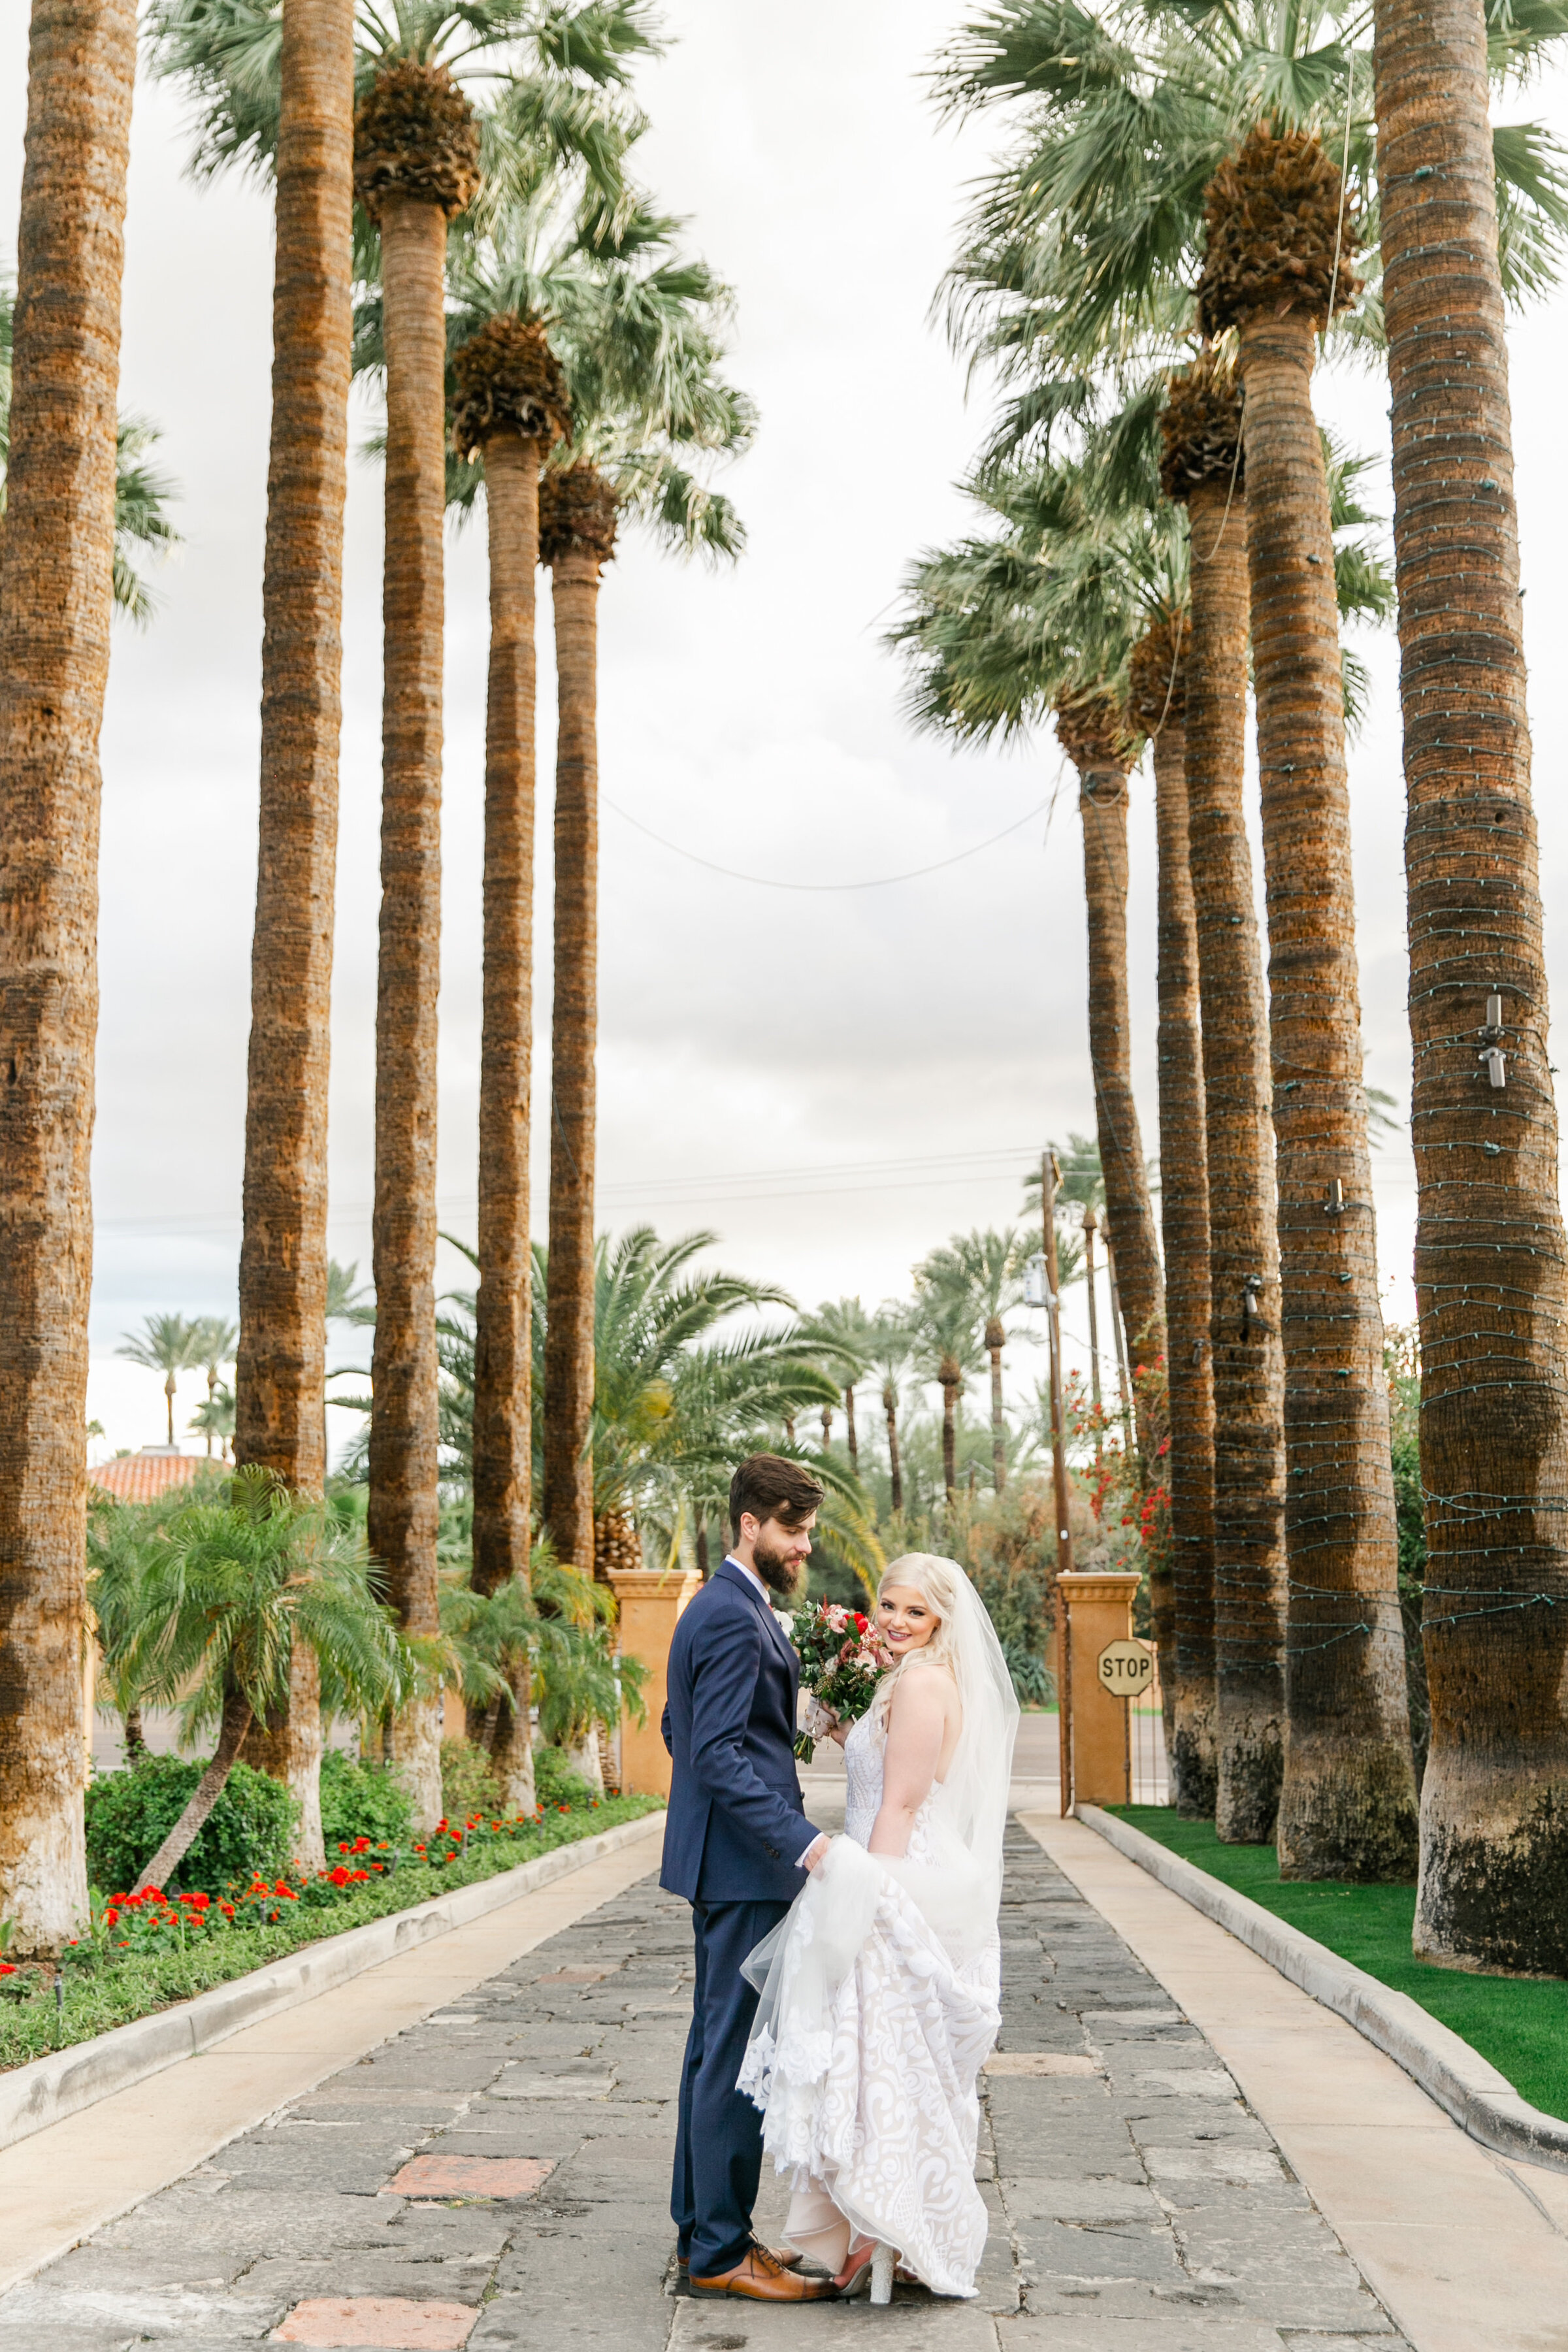 Karlie Colleen Photography - The Royal Palms Wedding - Some Like It Classic - Alex & Sam-575